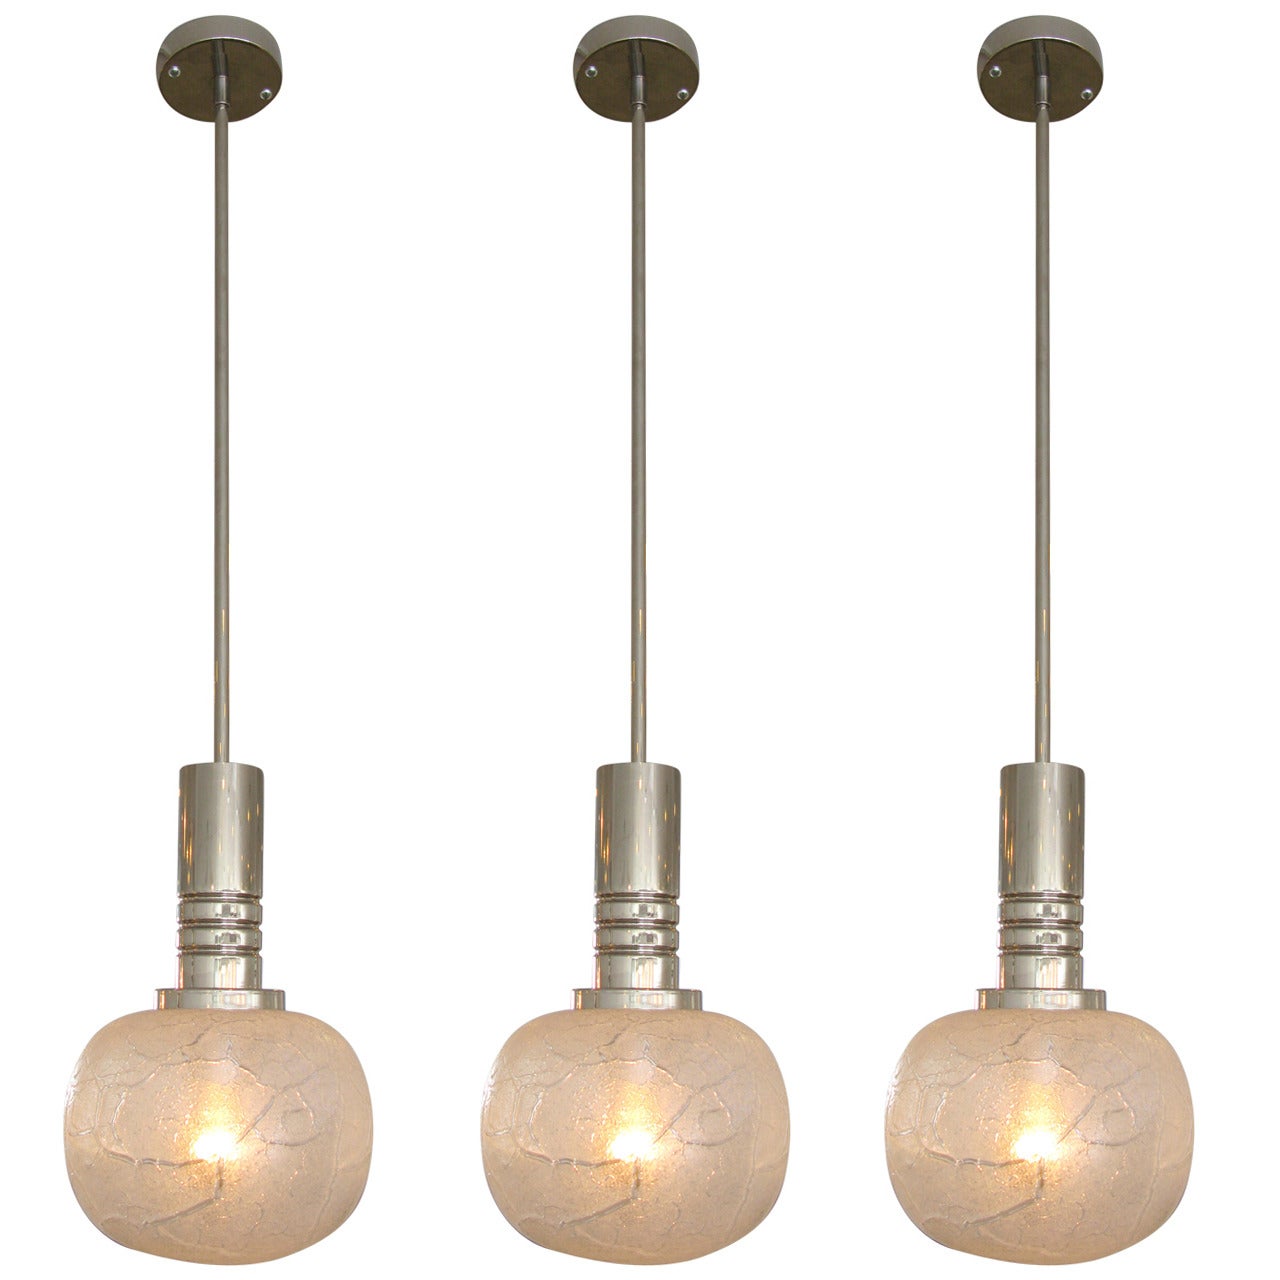 Trio of Crackled Ice Glass Pendant Lights